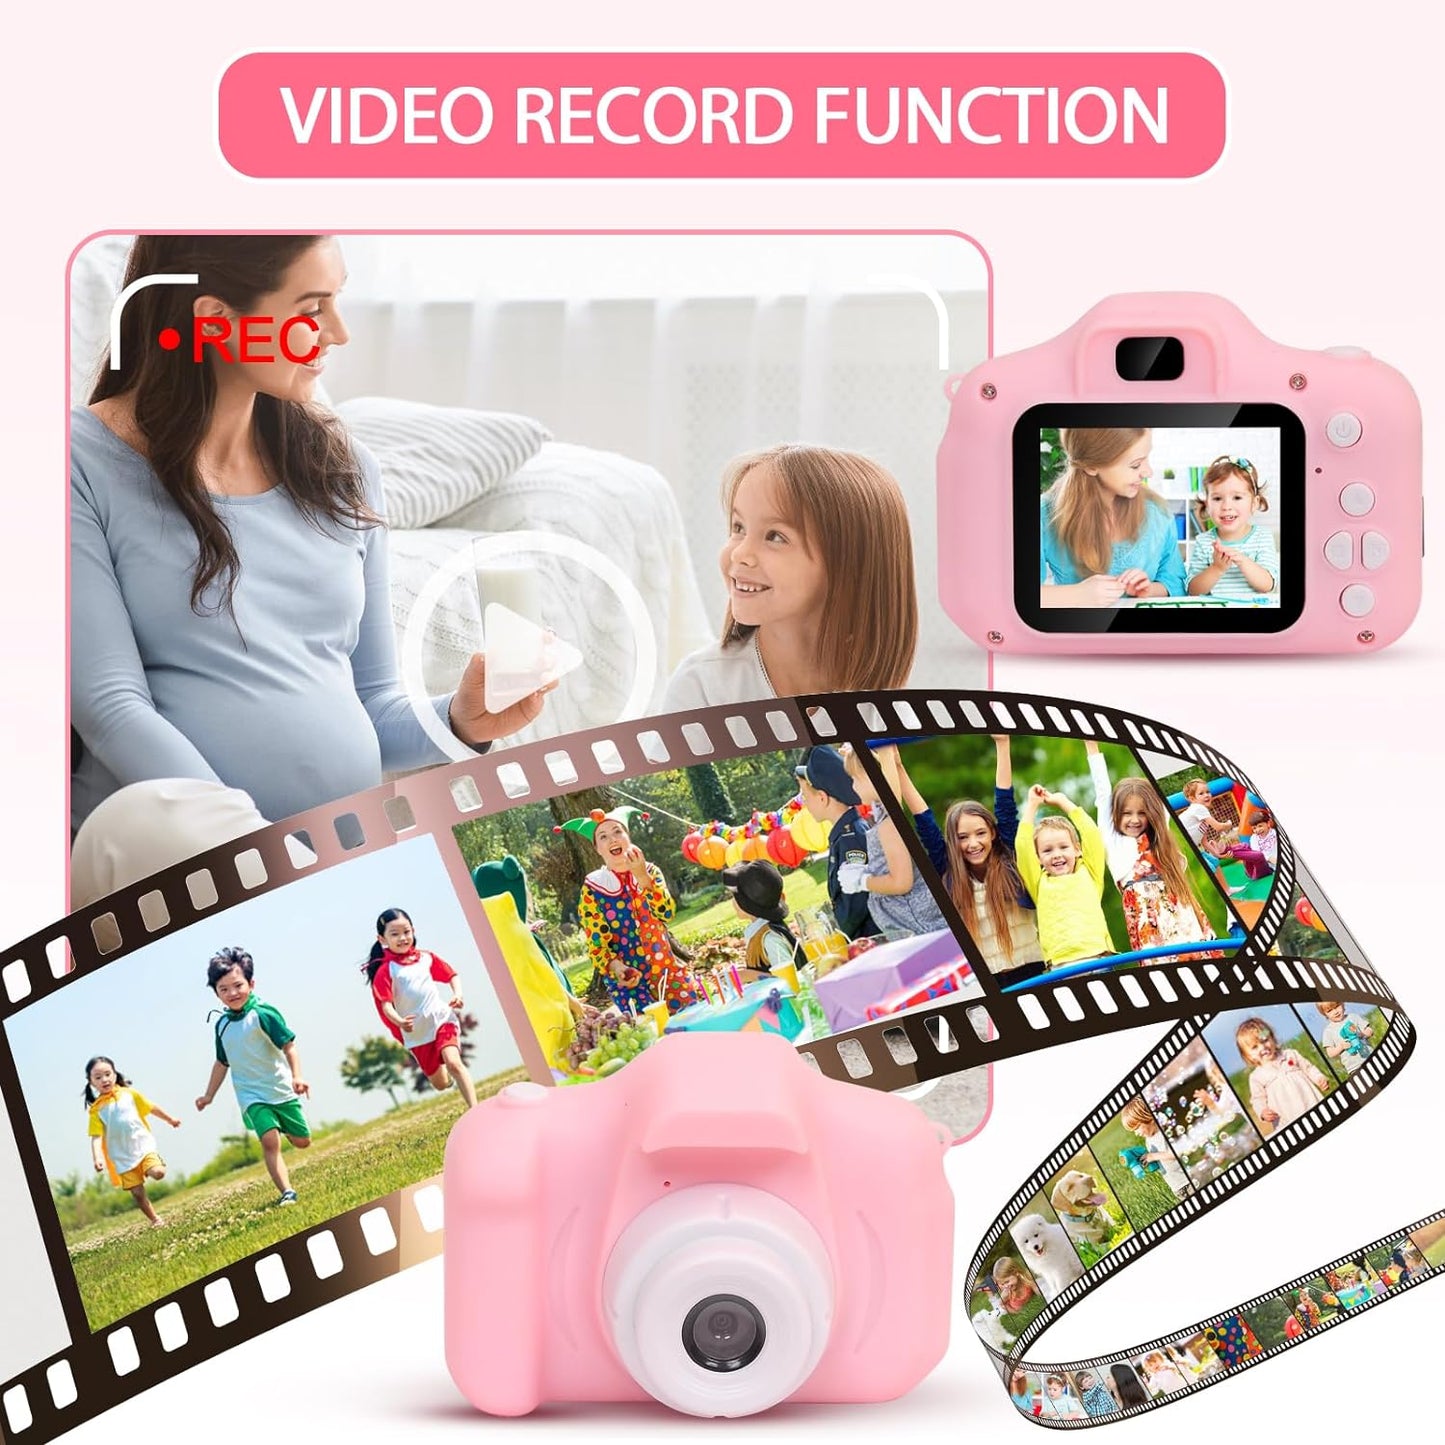 Kids Camera - HD Autofocus, 13MP, 1080P Video, 2000 Photos, Fun Frames,Games for Girls, Toddlers - Birthday Gift, Kids Toys-Pink